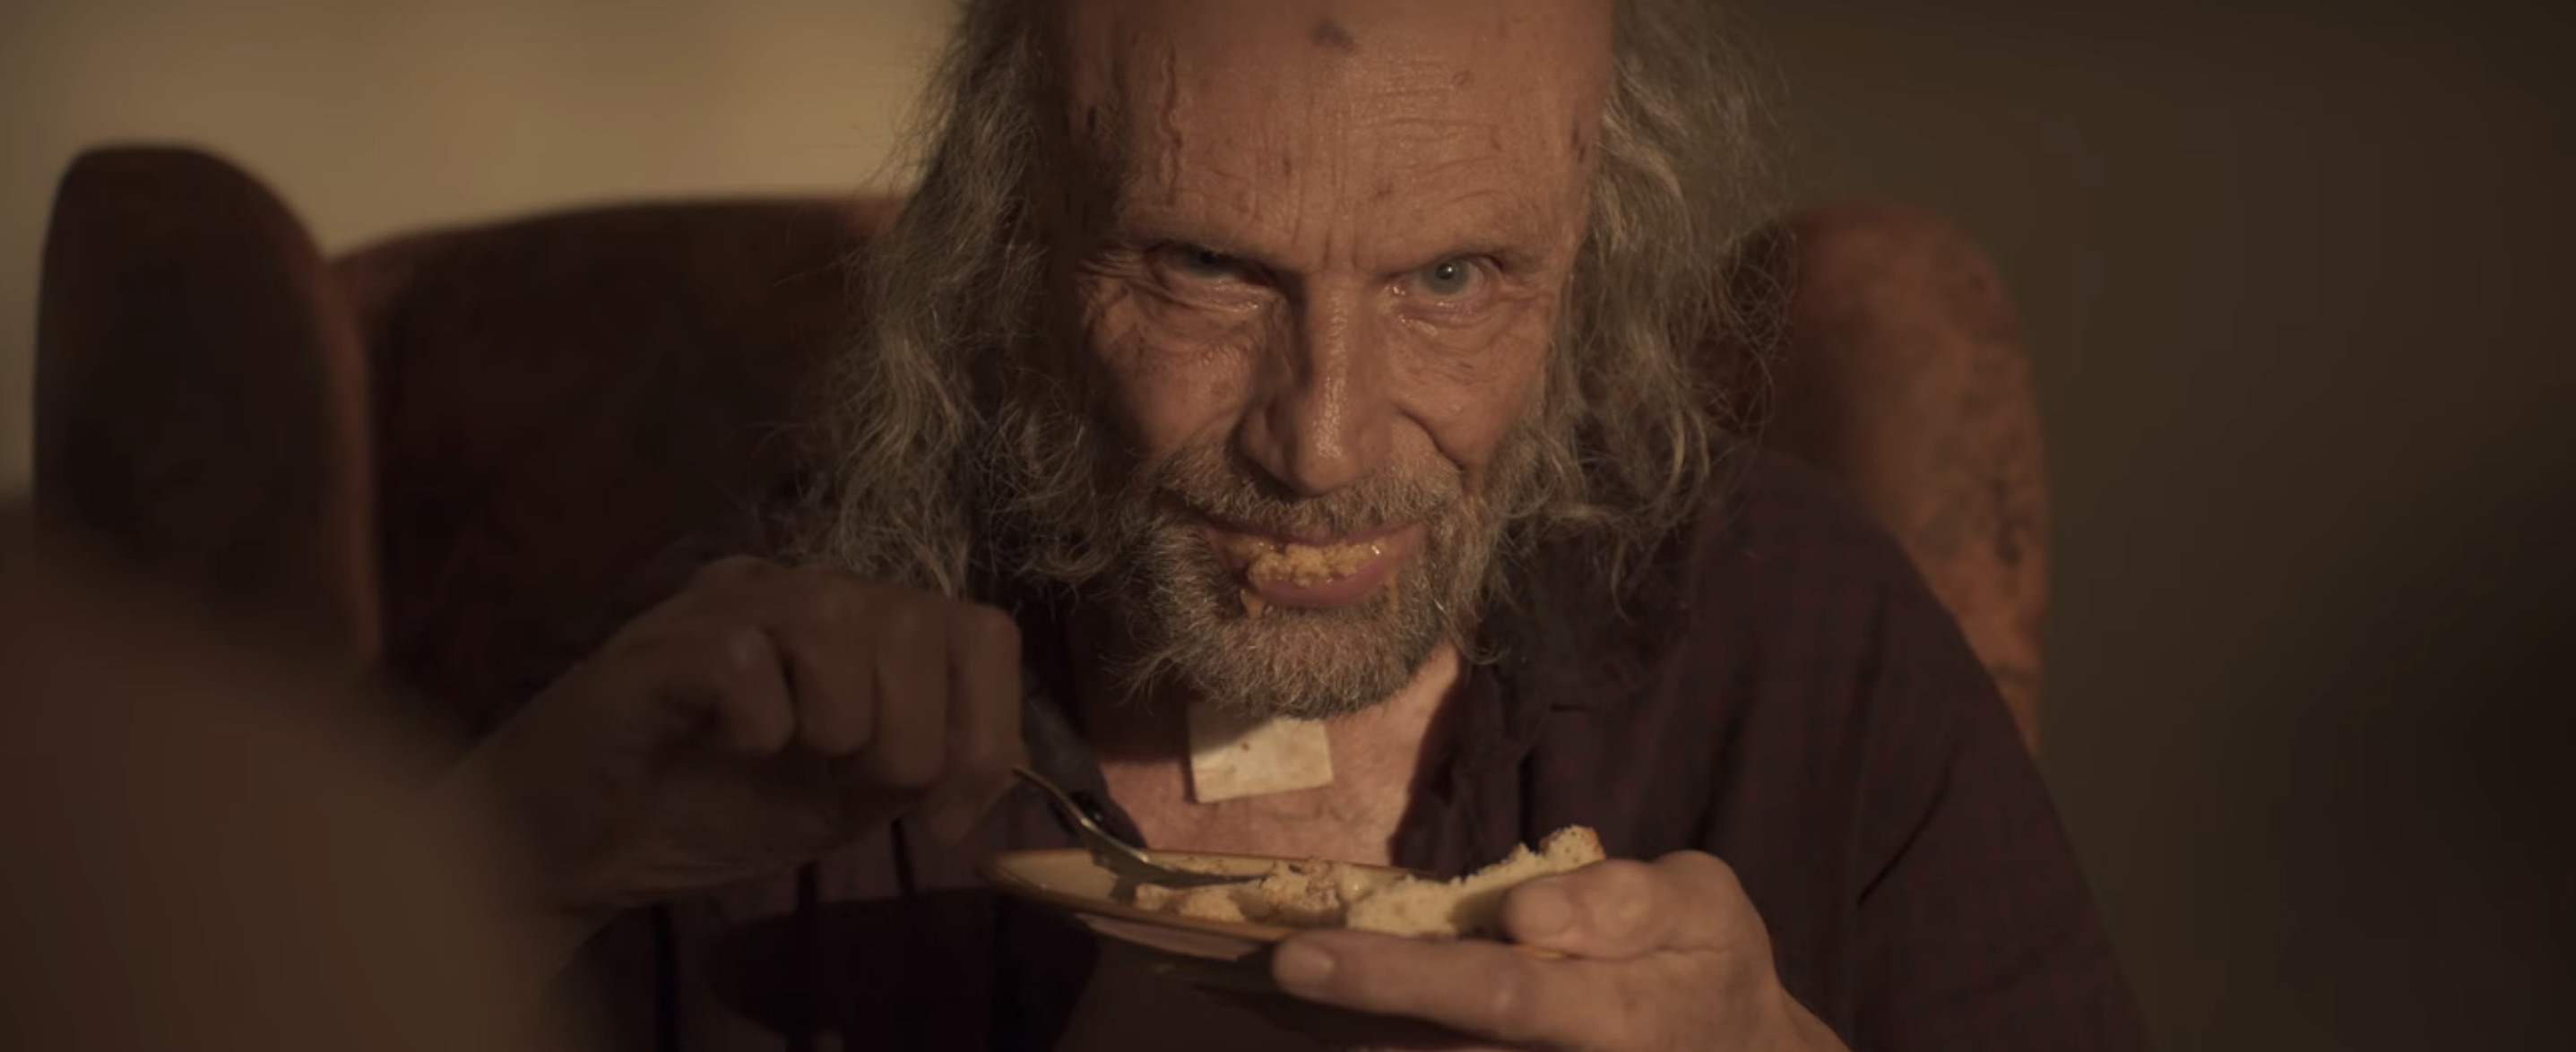 Old People Cast on Netflix - Gerhard Bös as The Old Man